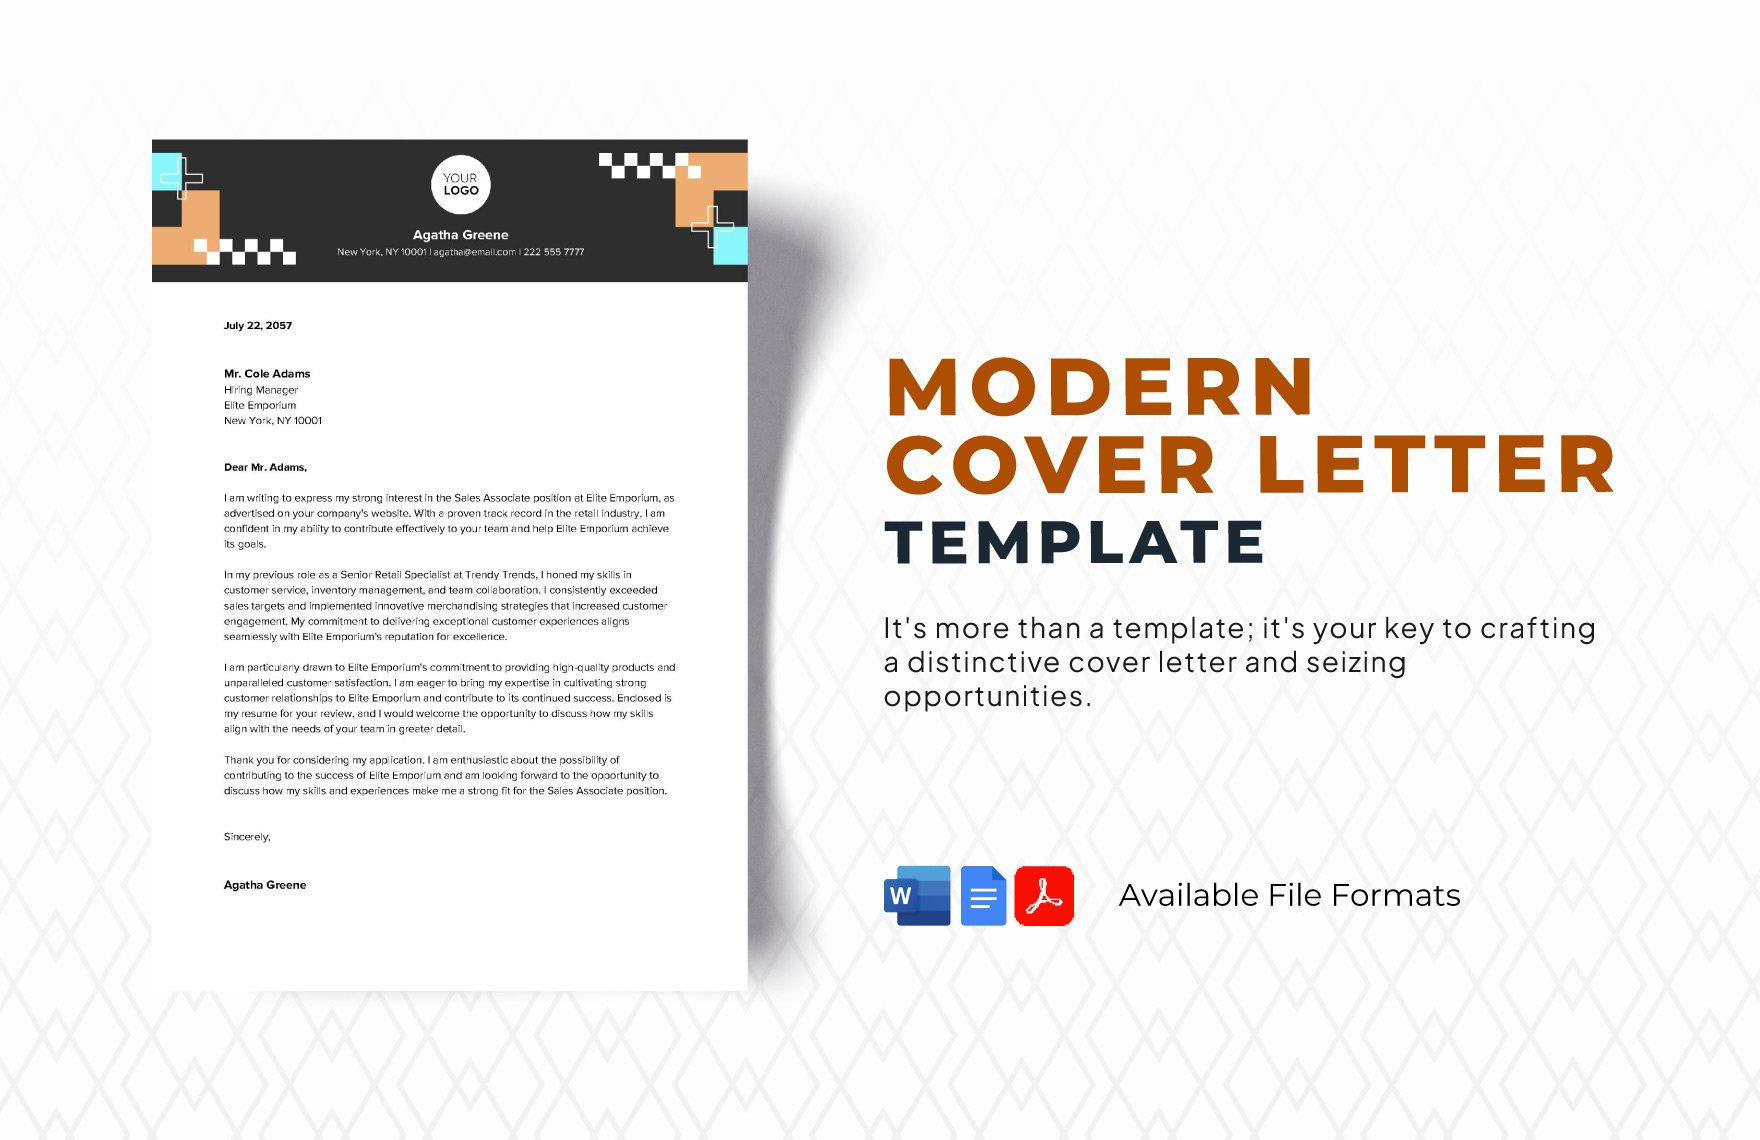 Modern Cover Letter Template in Word, Google Docs, PDF